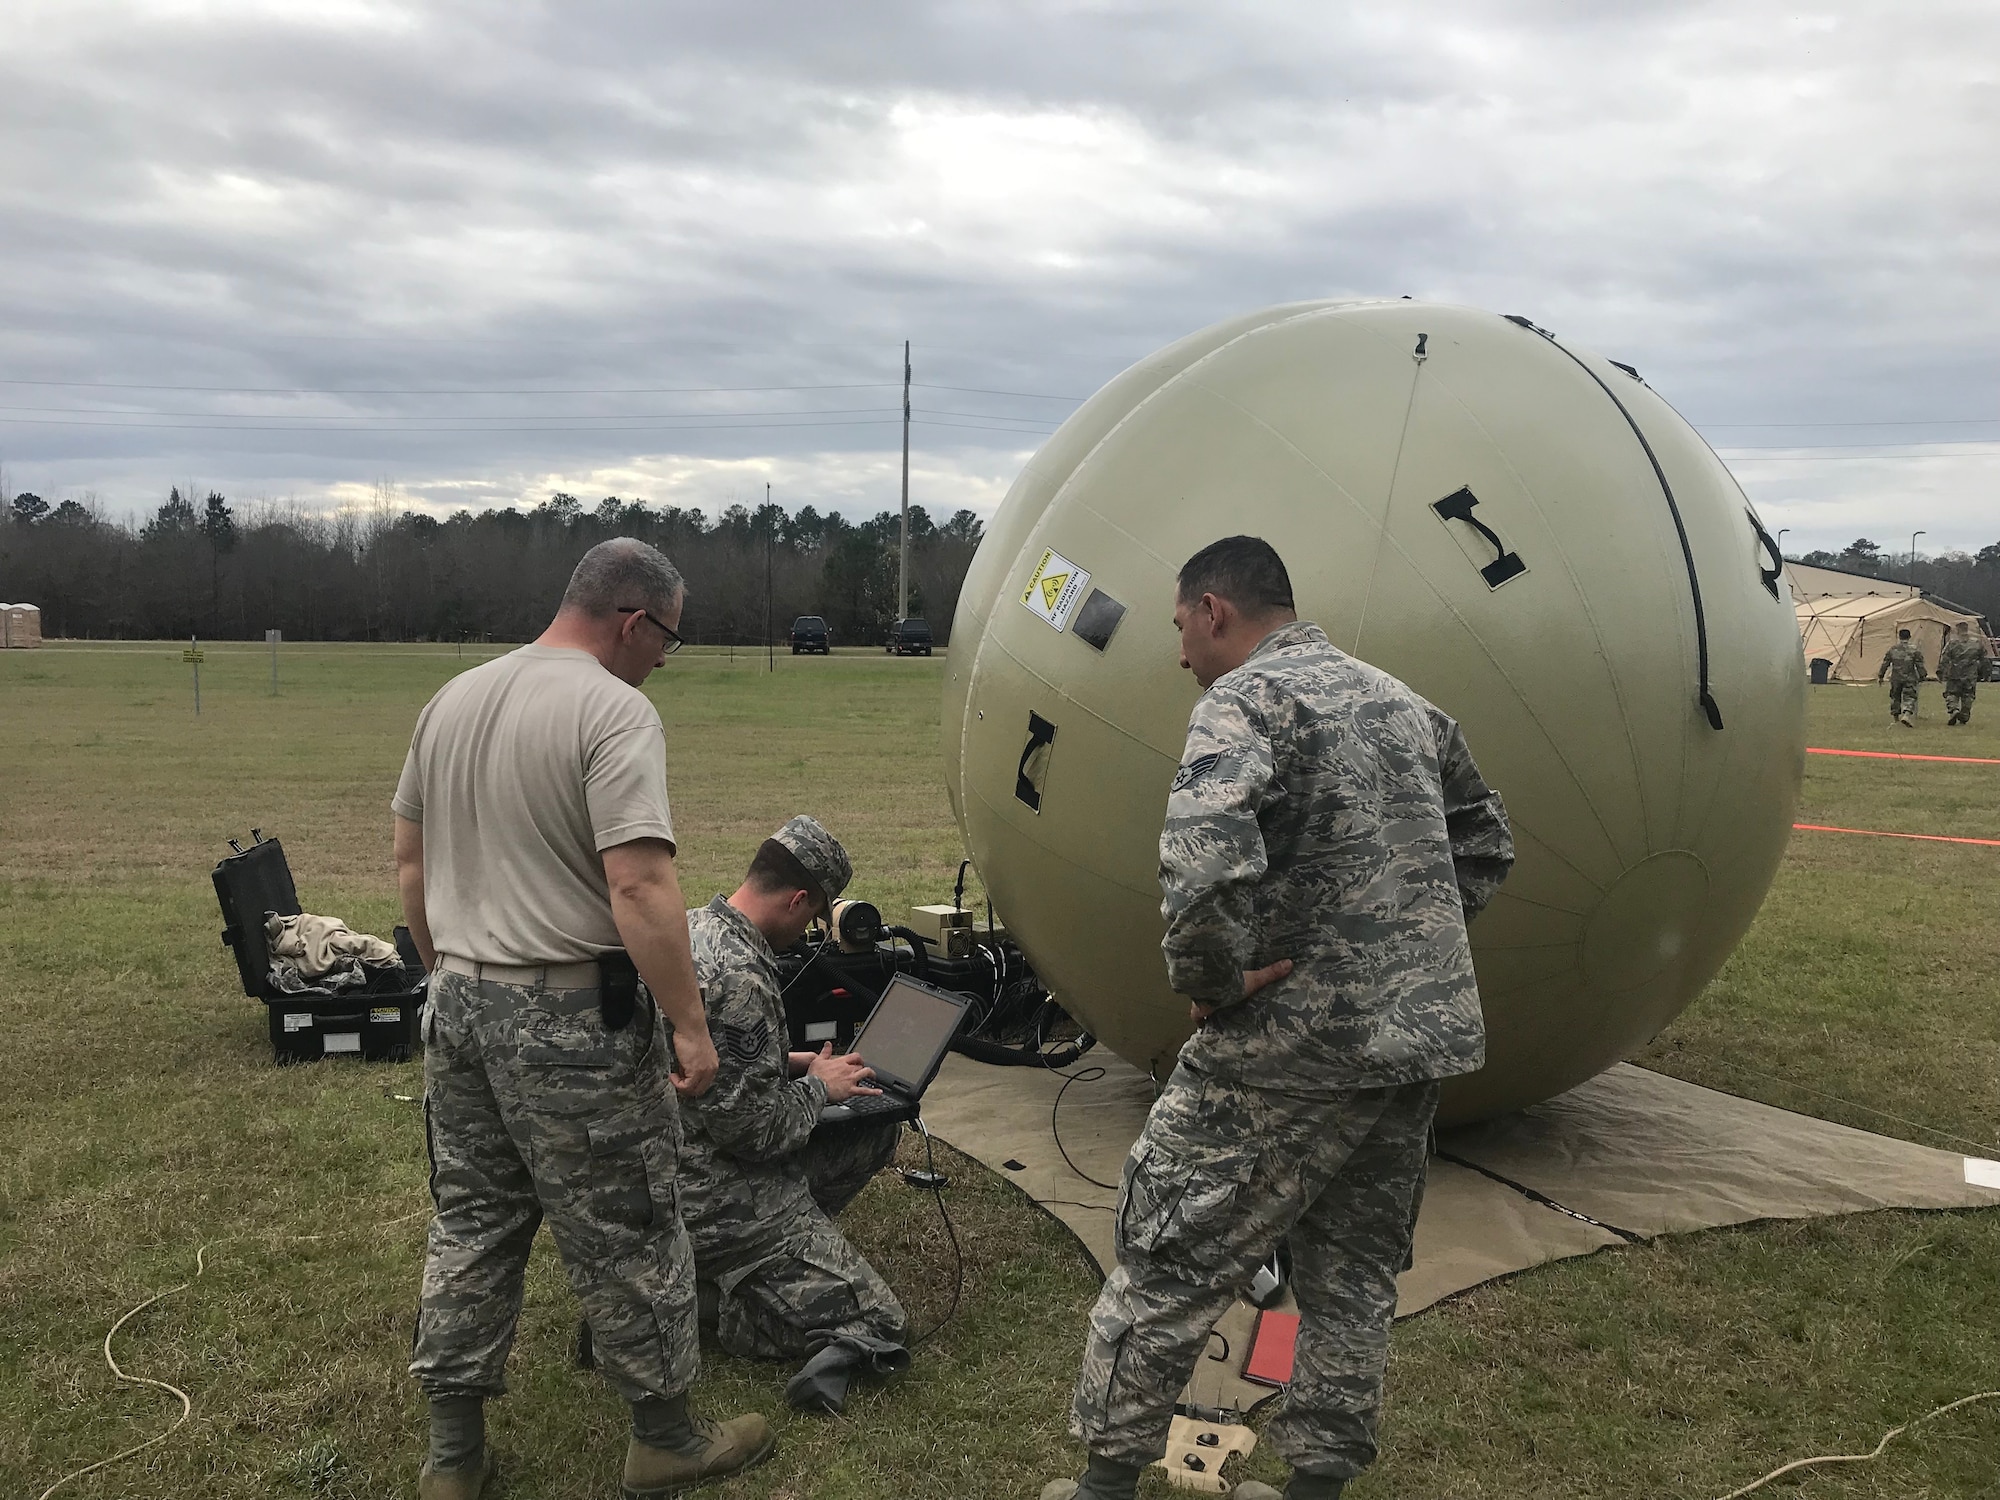 Members of the 263rd Combat Communications Squadron participate in the Combat Communications (CBC) Rodeo while at Robins Air Force Base, Georgia, Mar. 8, 2019. The CBC Rodeo is a Nationwide training exercise that brings together Combat Communications Squadrons from across the country to train in techniques and skills while networking to increase the potential success of future deployments.